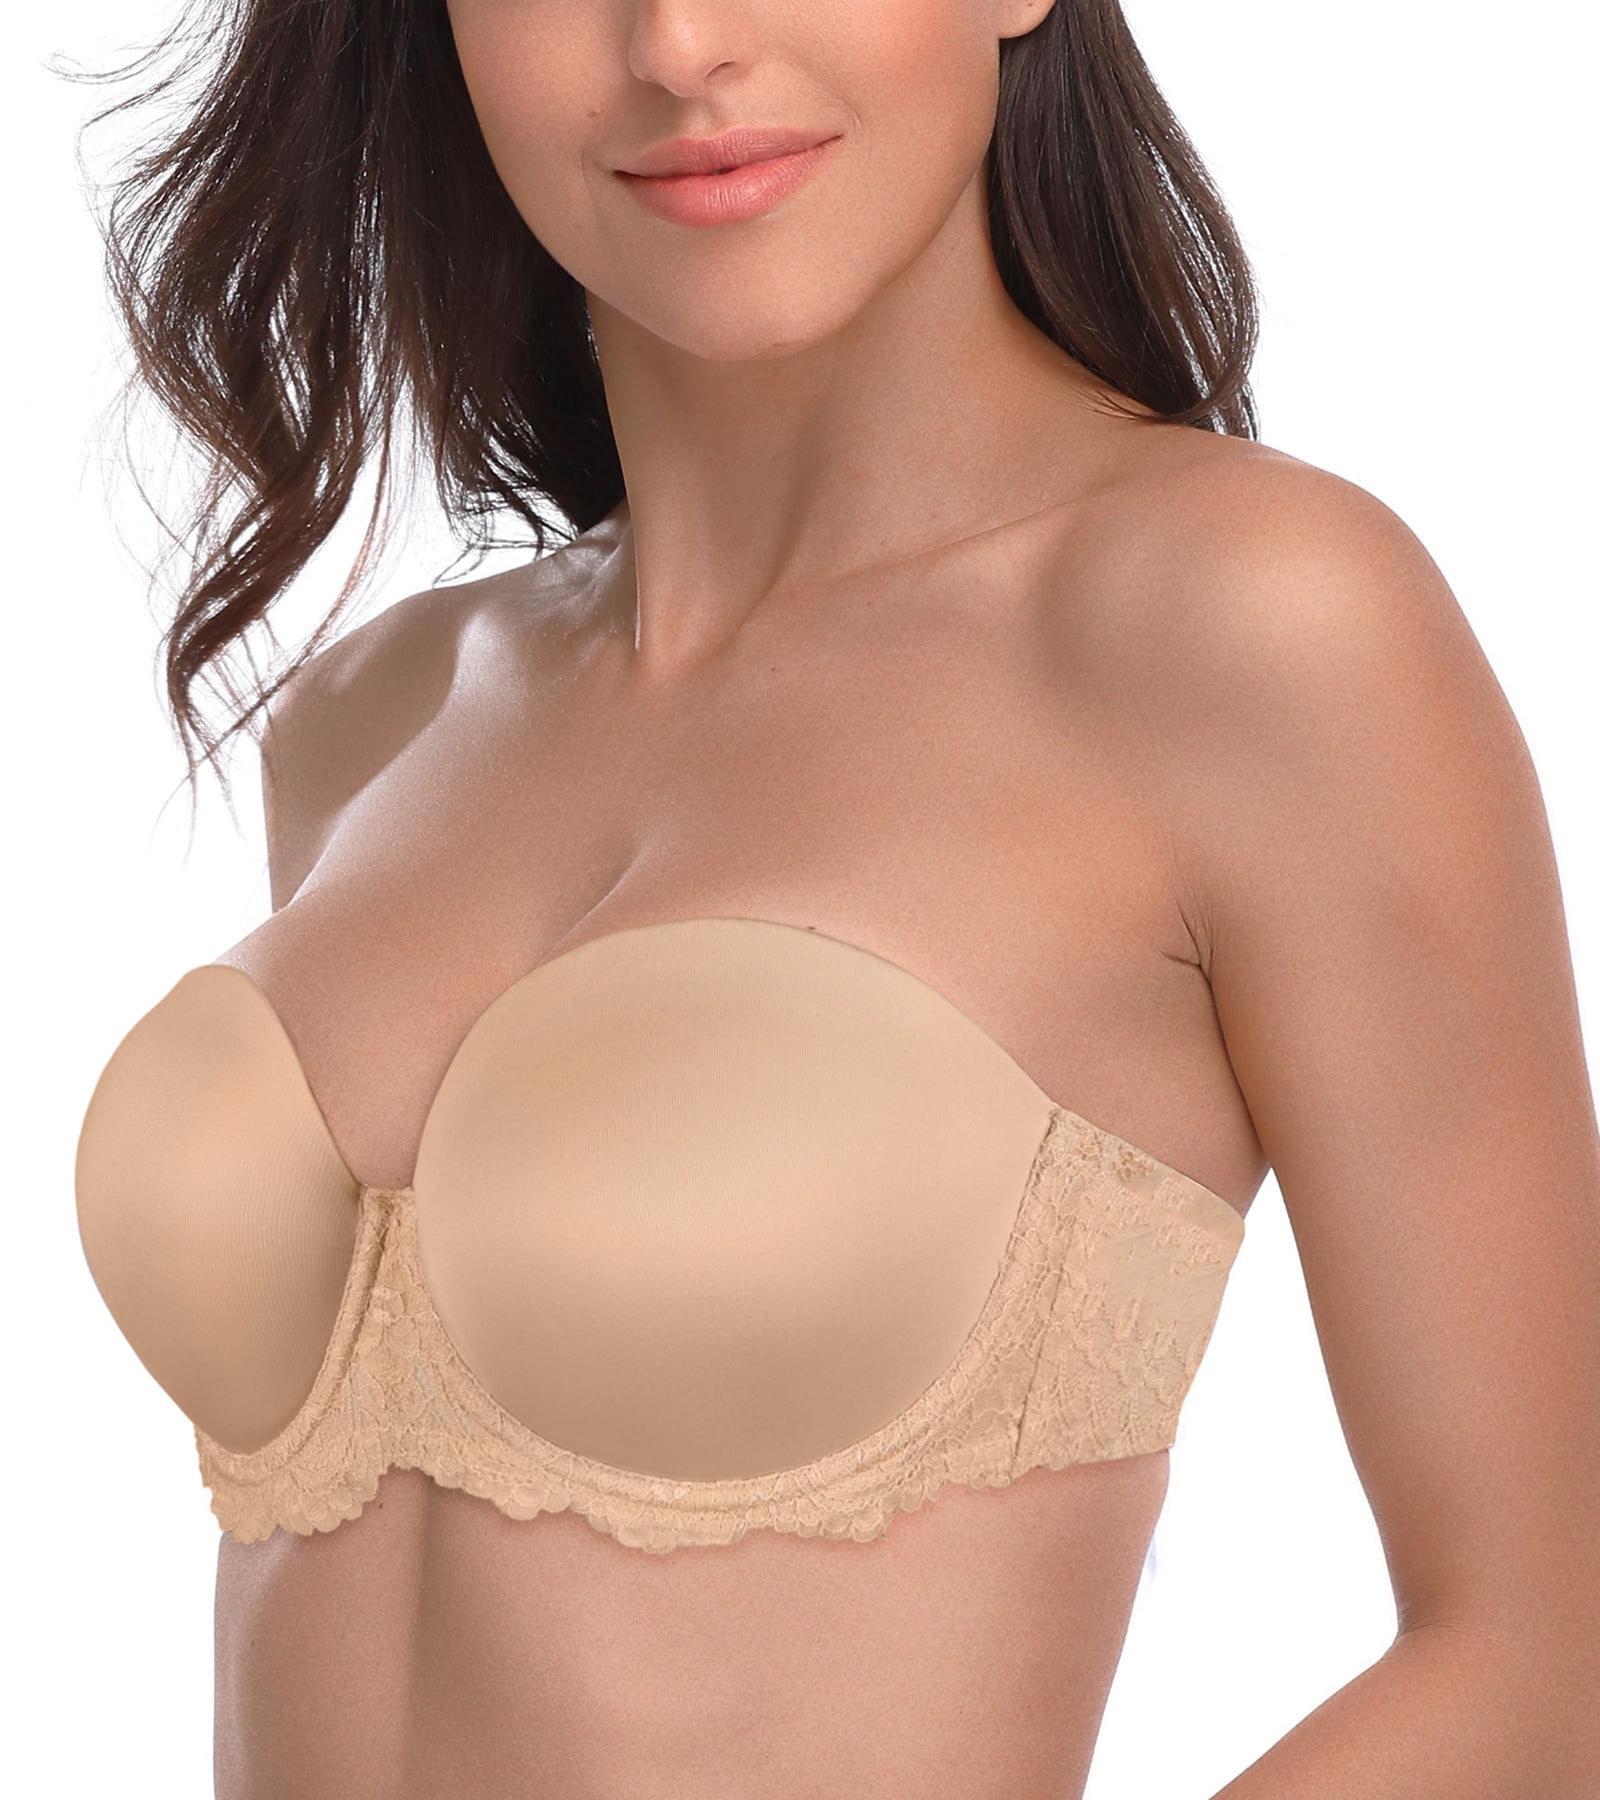 One trick that will keep your strapless bra in place - Amazingly